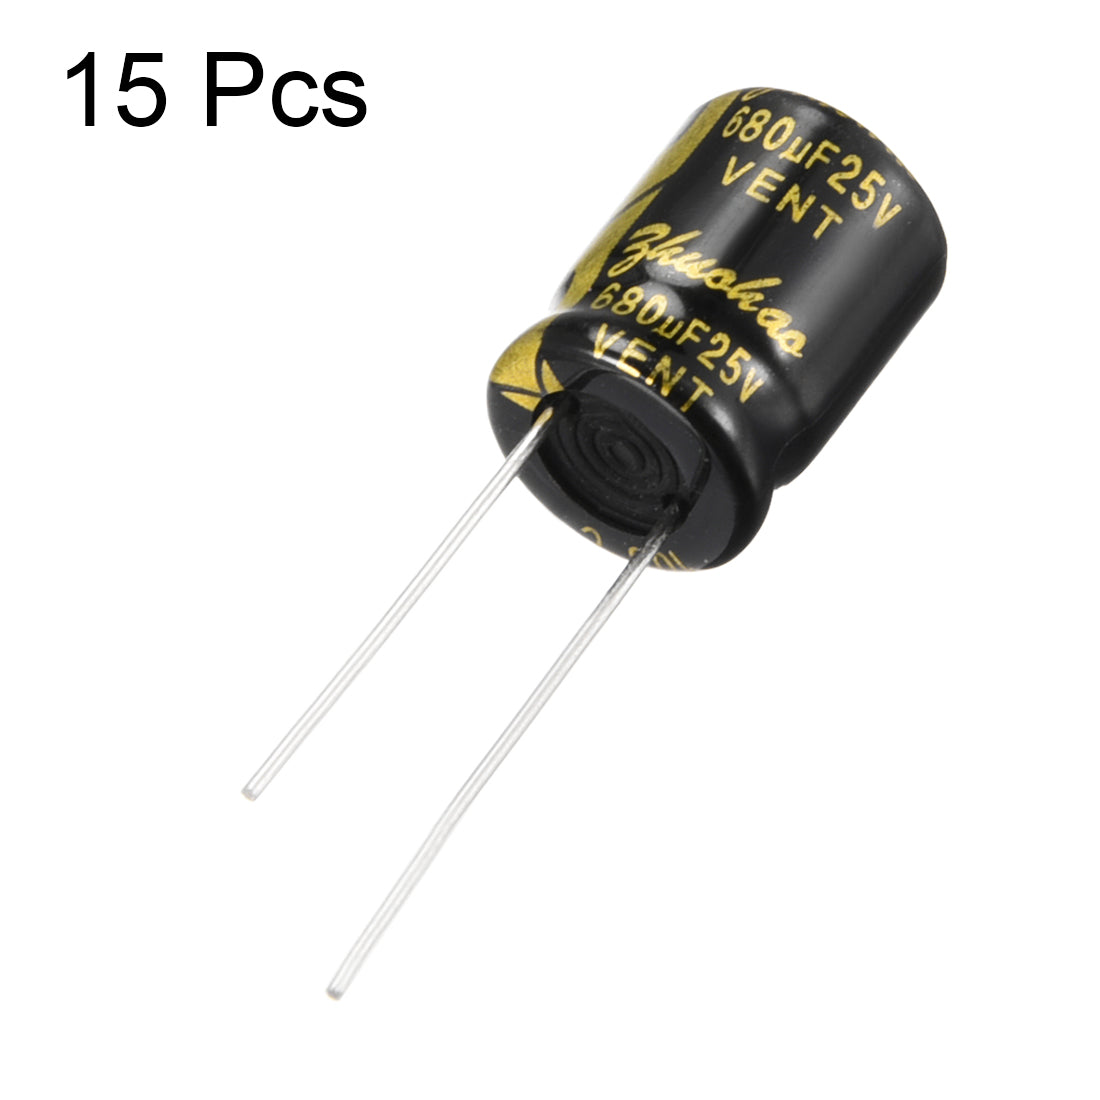 uxcell Uxcell Aluminum Radial Electrolytic Capacitor with 680uF 25V 105 Celsius Life 2000H 10 x 13 mm Black 15pcs